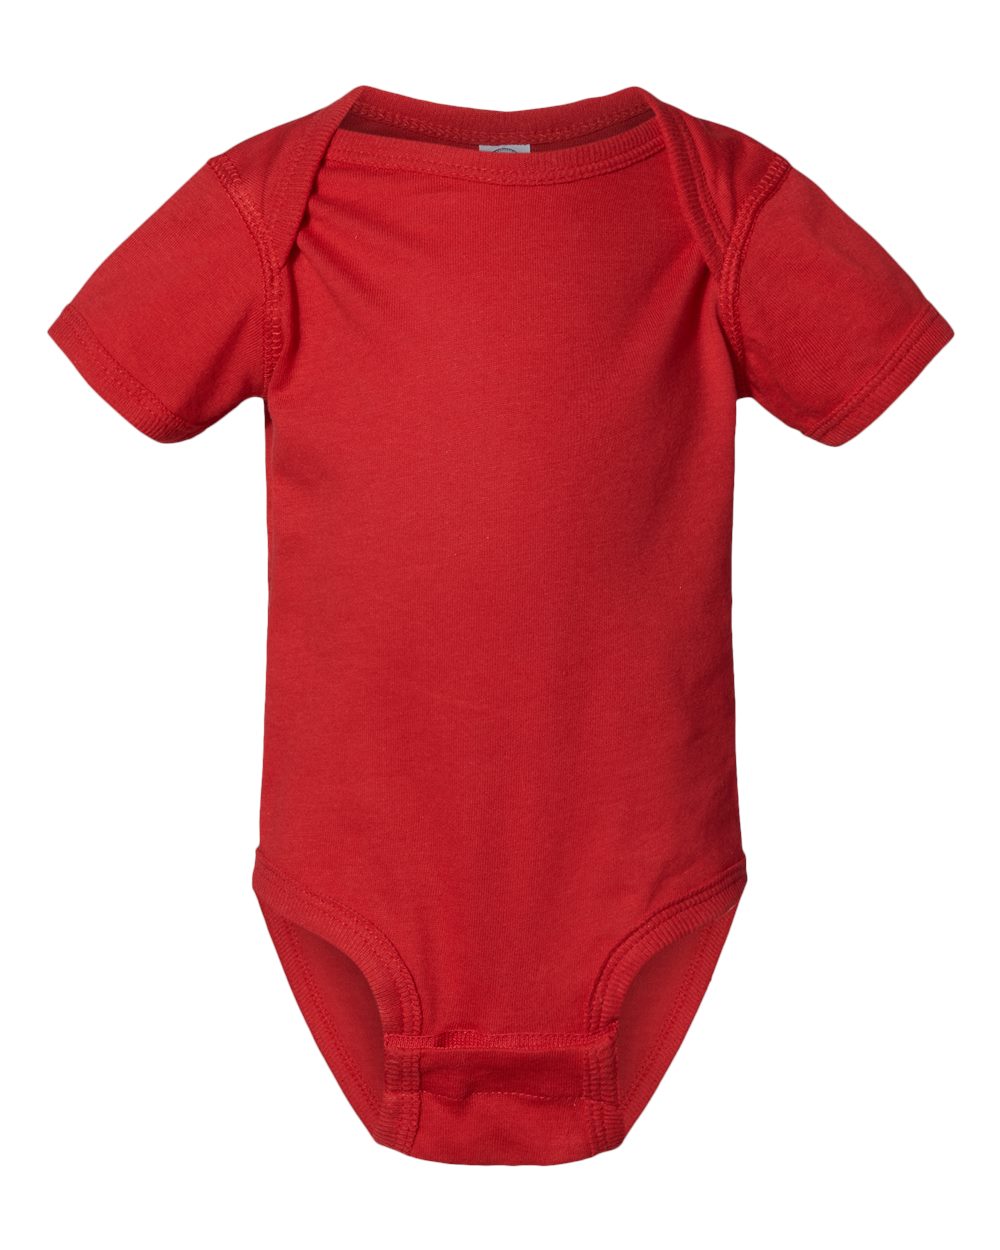 Guess What Chicken Butt Onesie/Body Suit